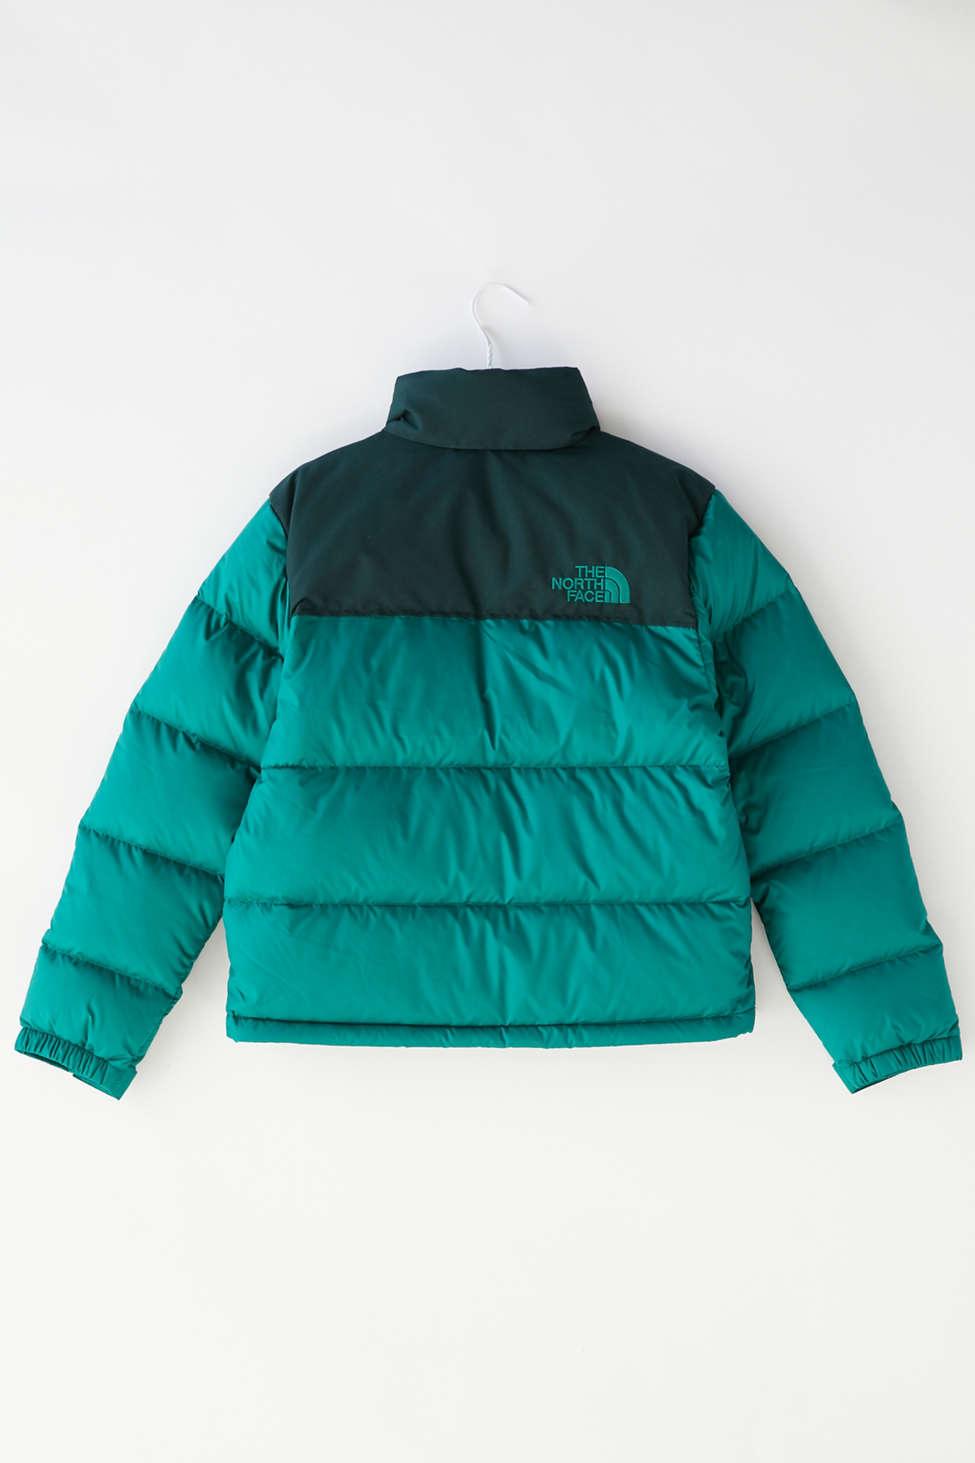 The North Face Eco Nuptse Puffer Jacket in Dark Green (Green) - Lyst